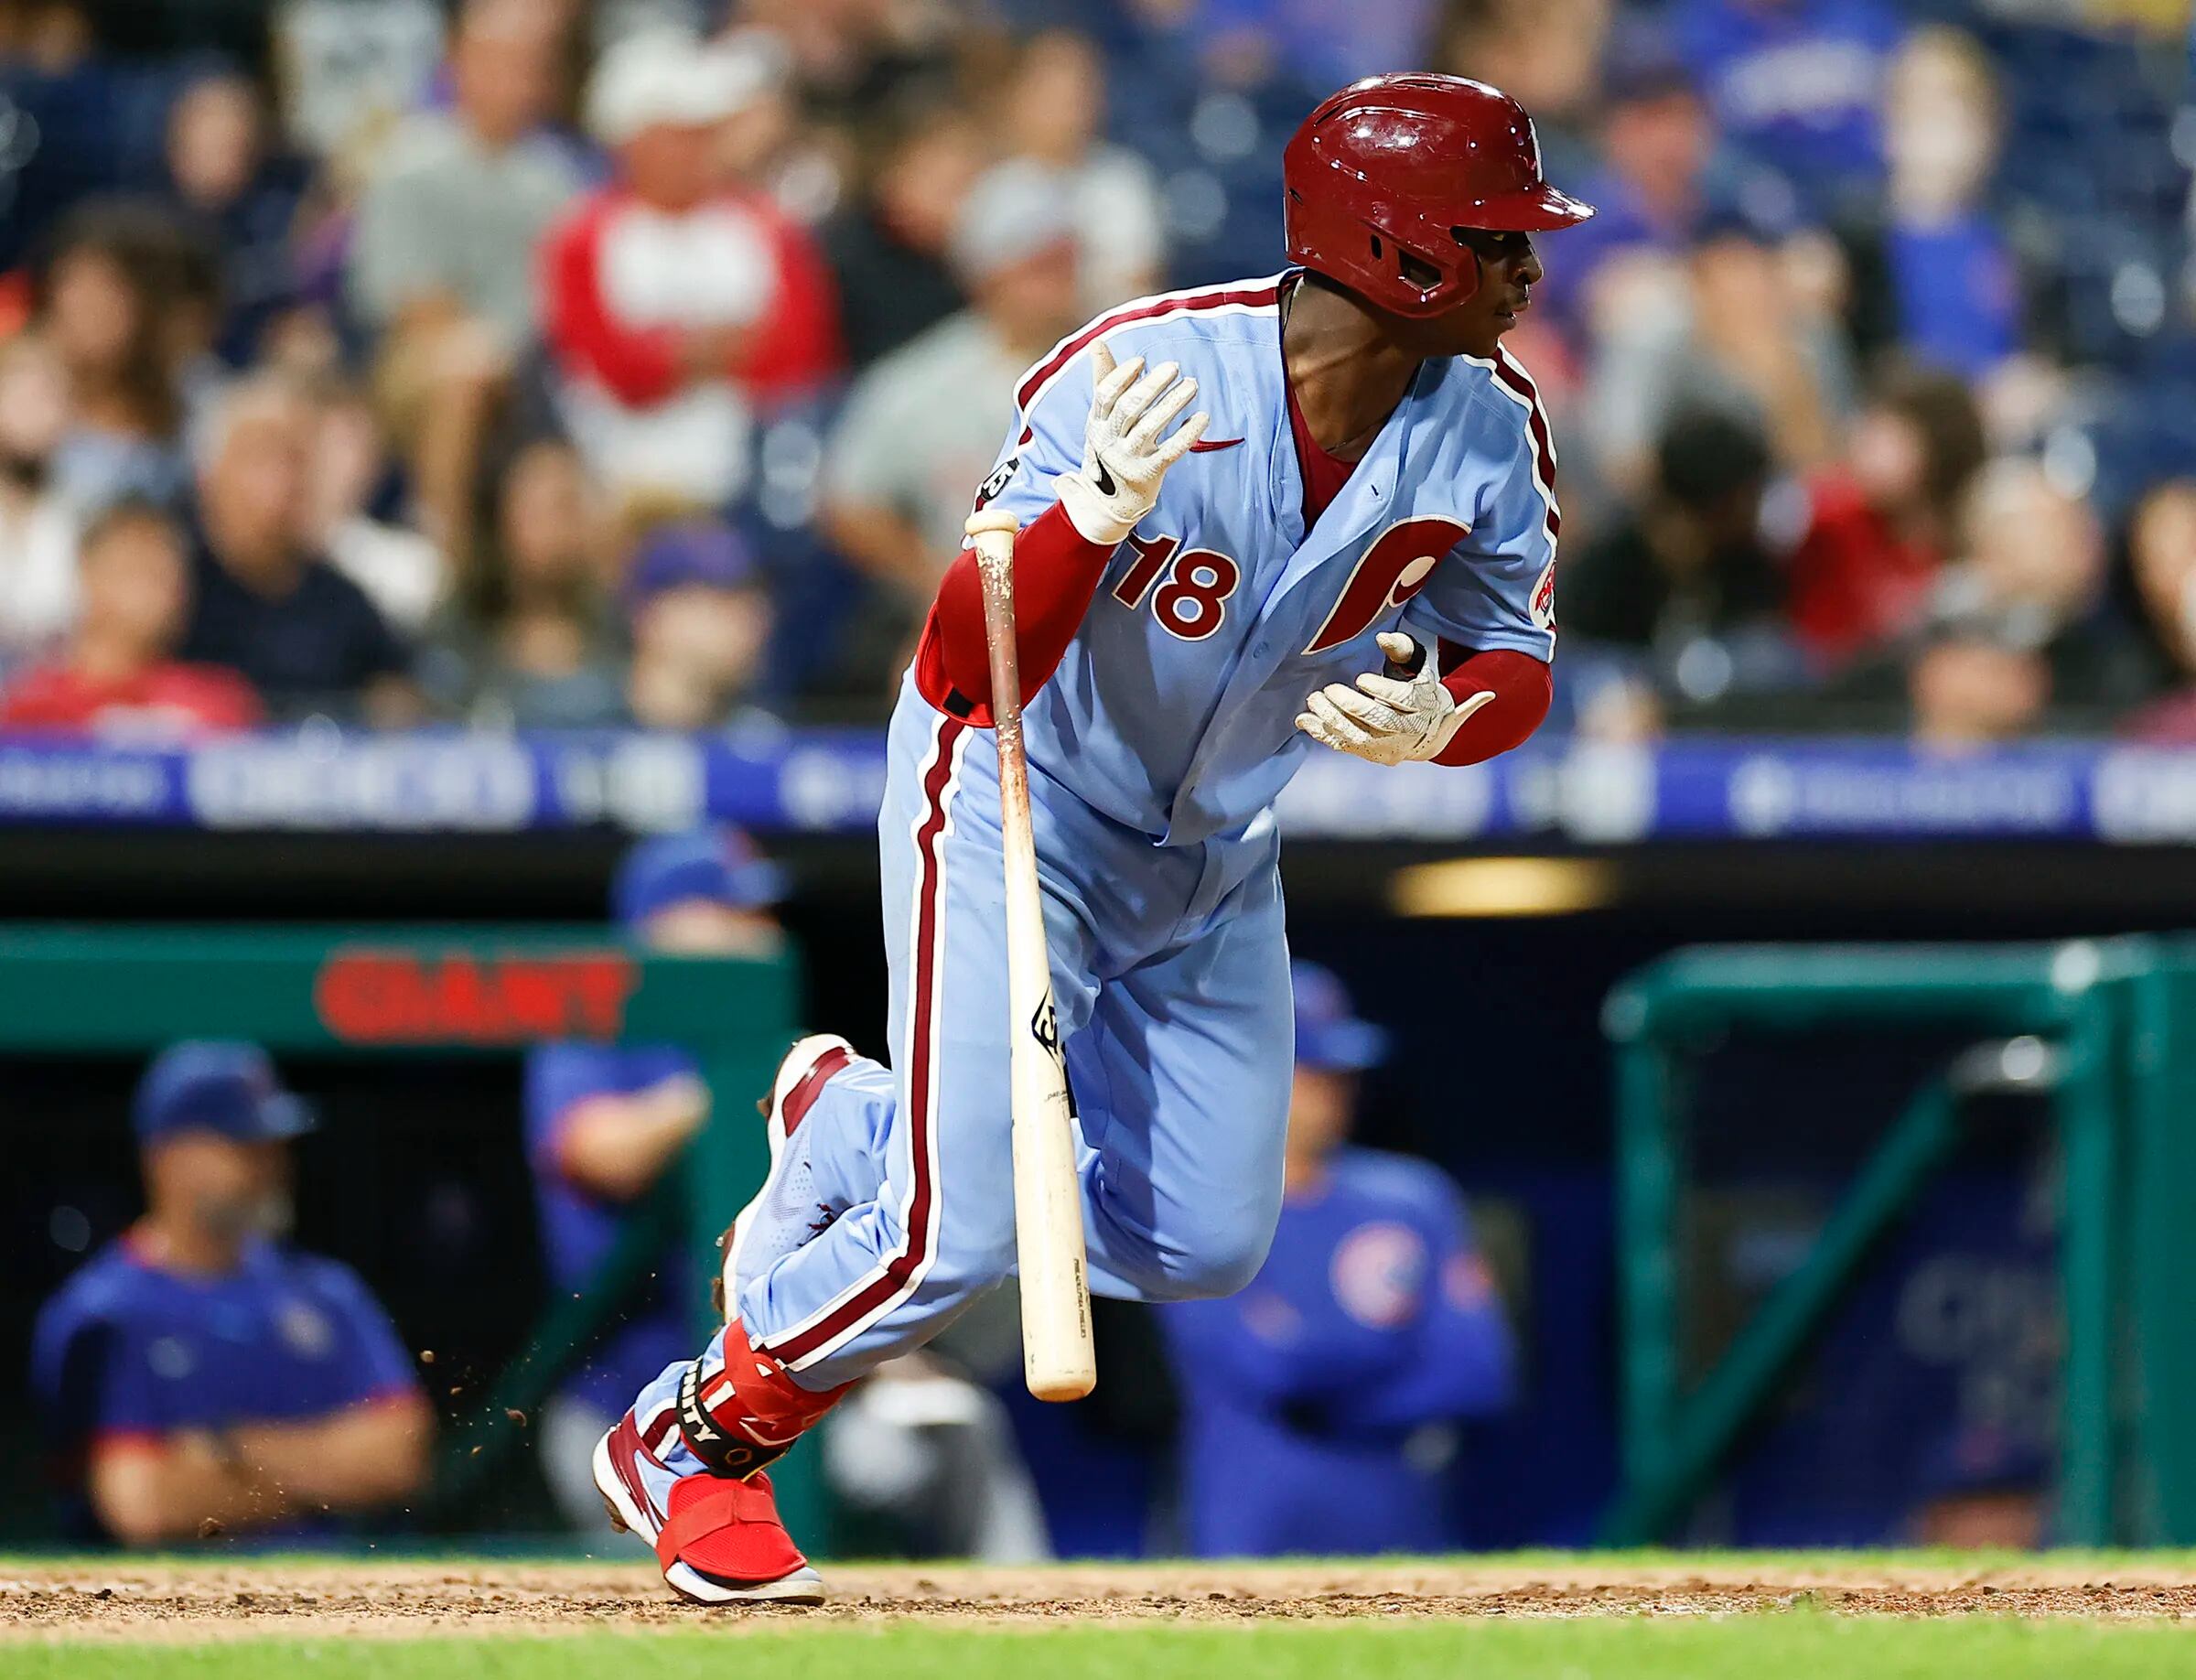 Bryce Harper sparks a 17-8 win over the Cubs as Phillies erase seven-run  deficit